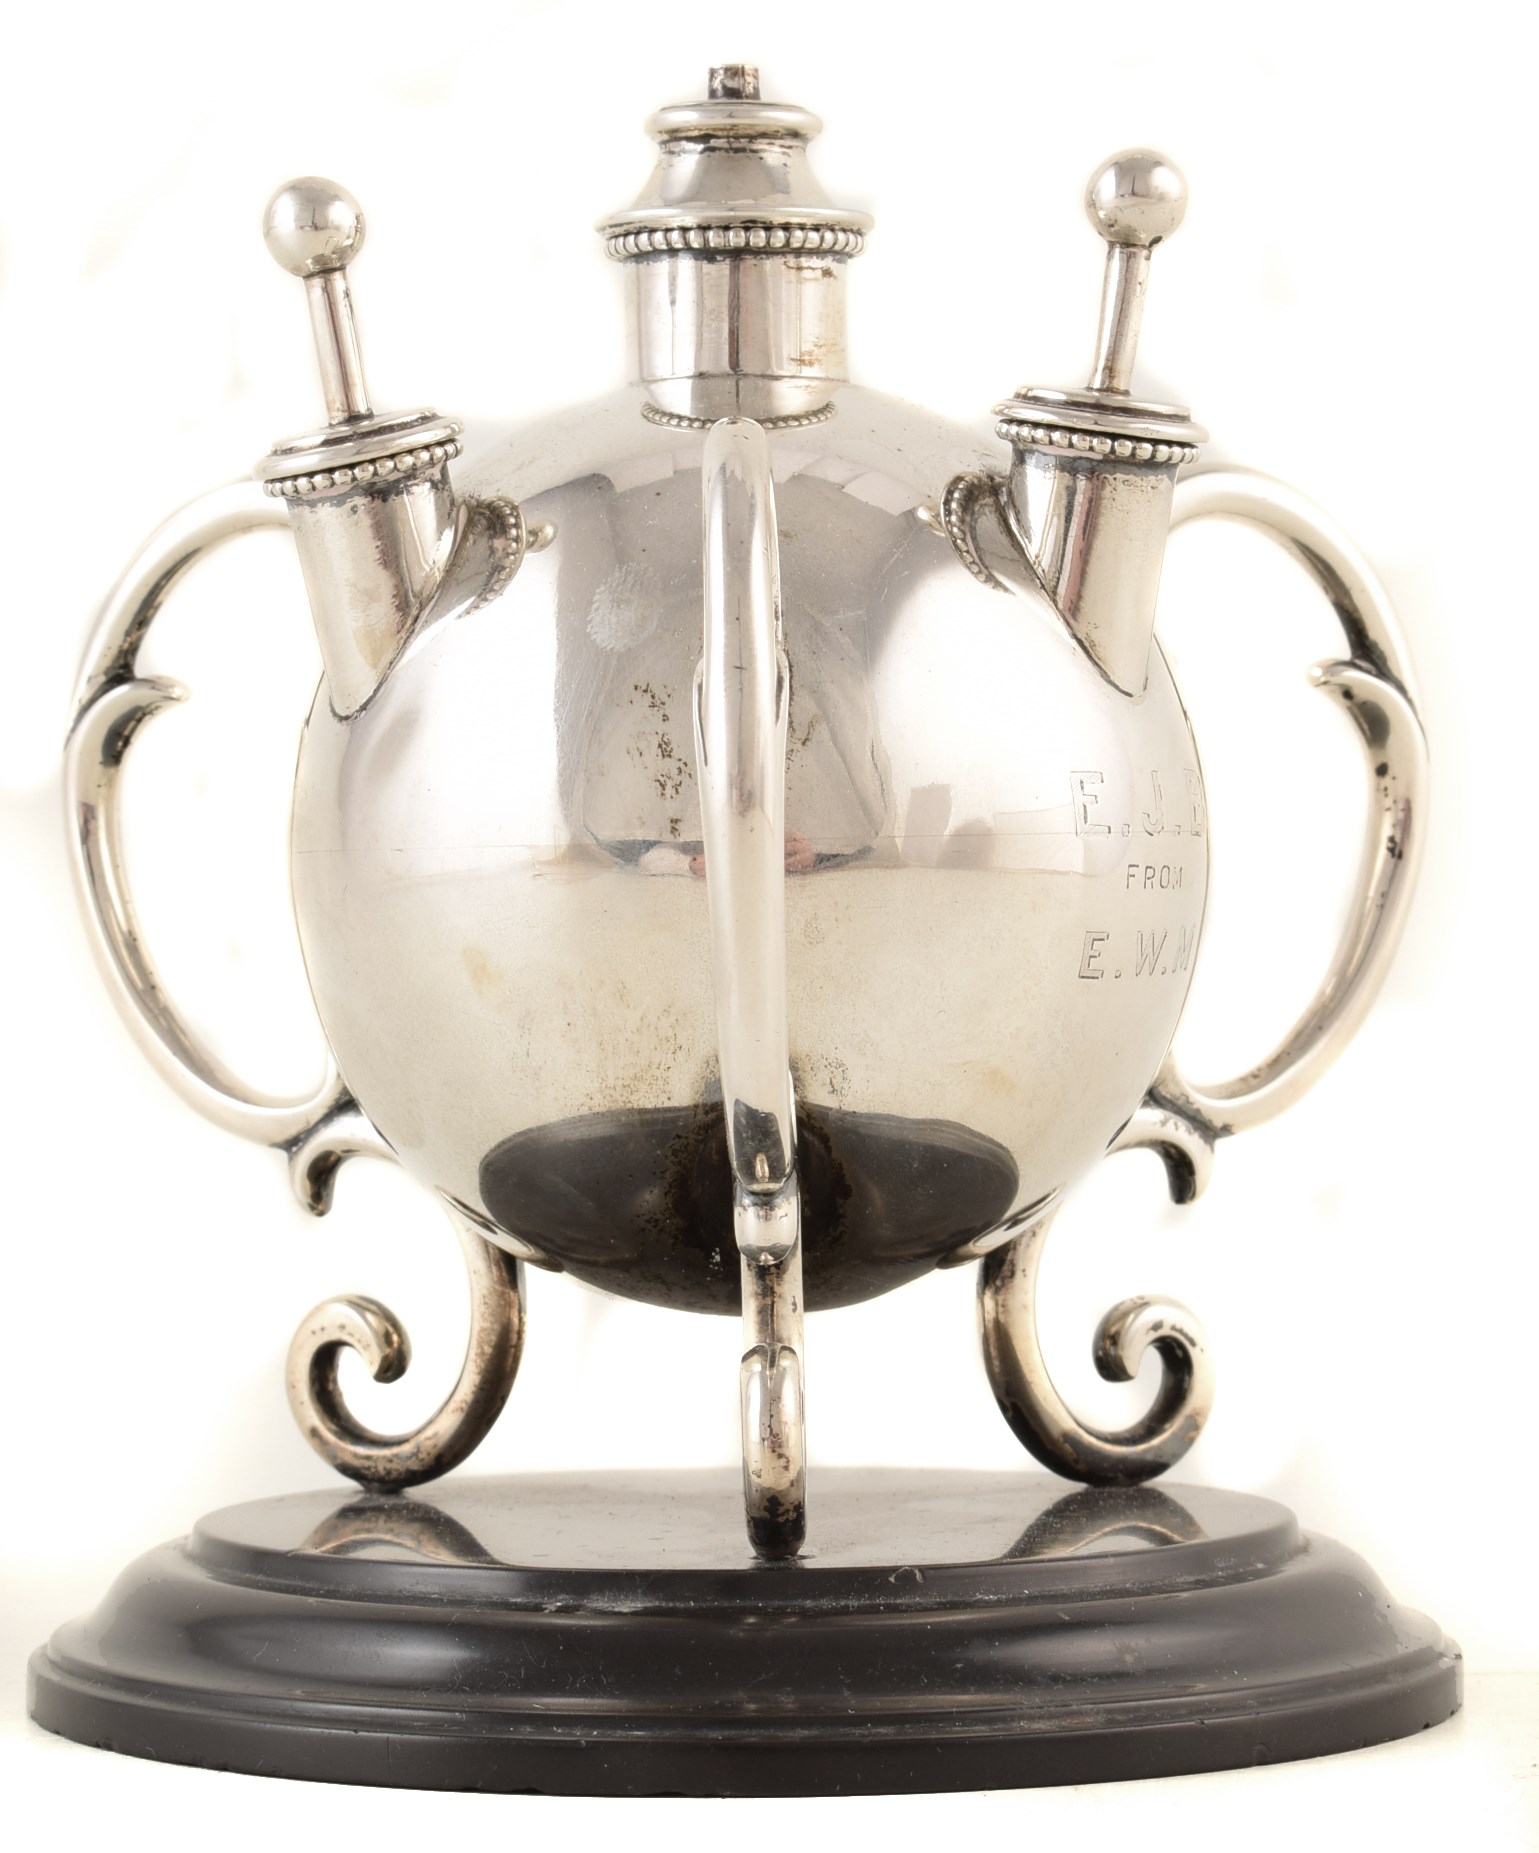 Silver spherical cigar/cigarette table lighter , height approx. 13cm, inscribed 'E.J.B from E.W.M.',